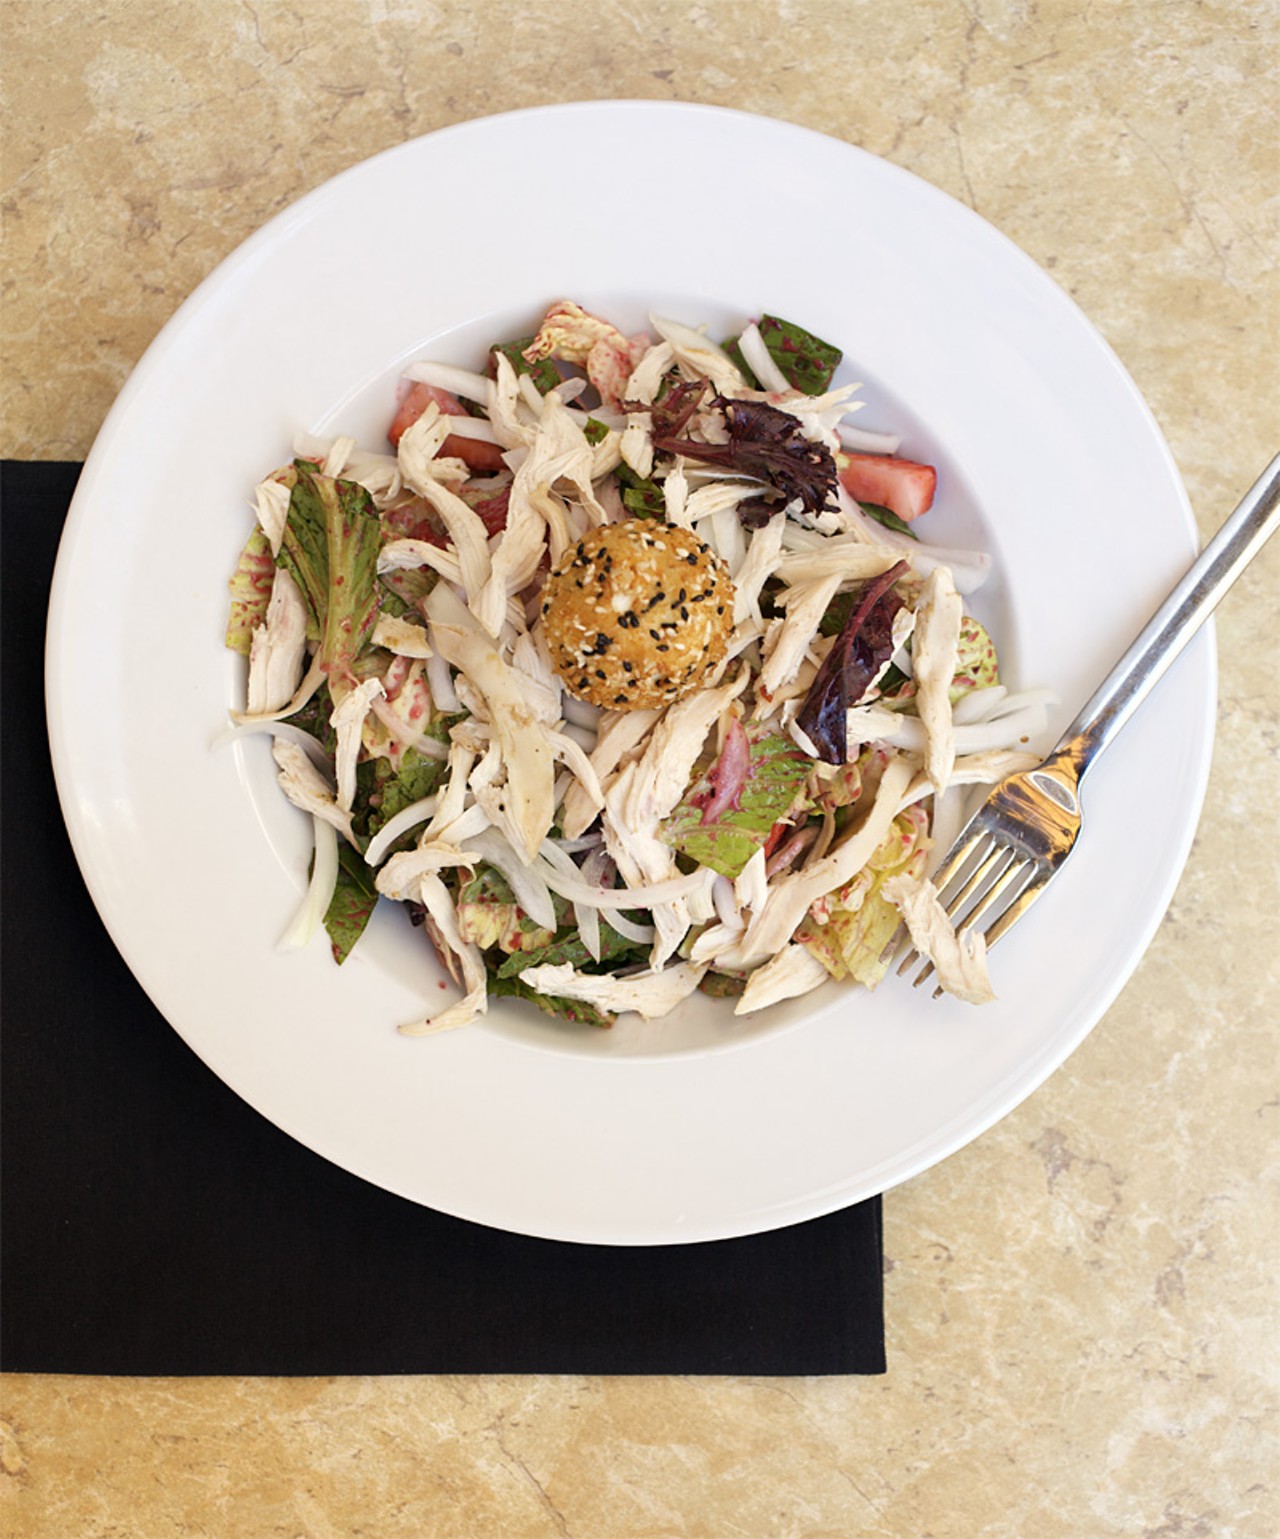 Copia's Goat Cheese Salad is mixed greens, roasted chicken, sweet onion, sliced strawberries tossed in cracked pepper berry vinaigrette. It is then topped with warm sesame encrusted goat cheese.